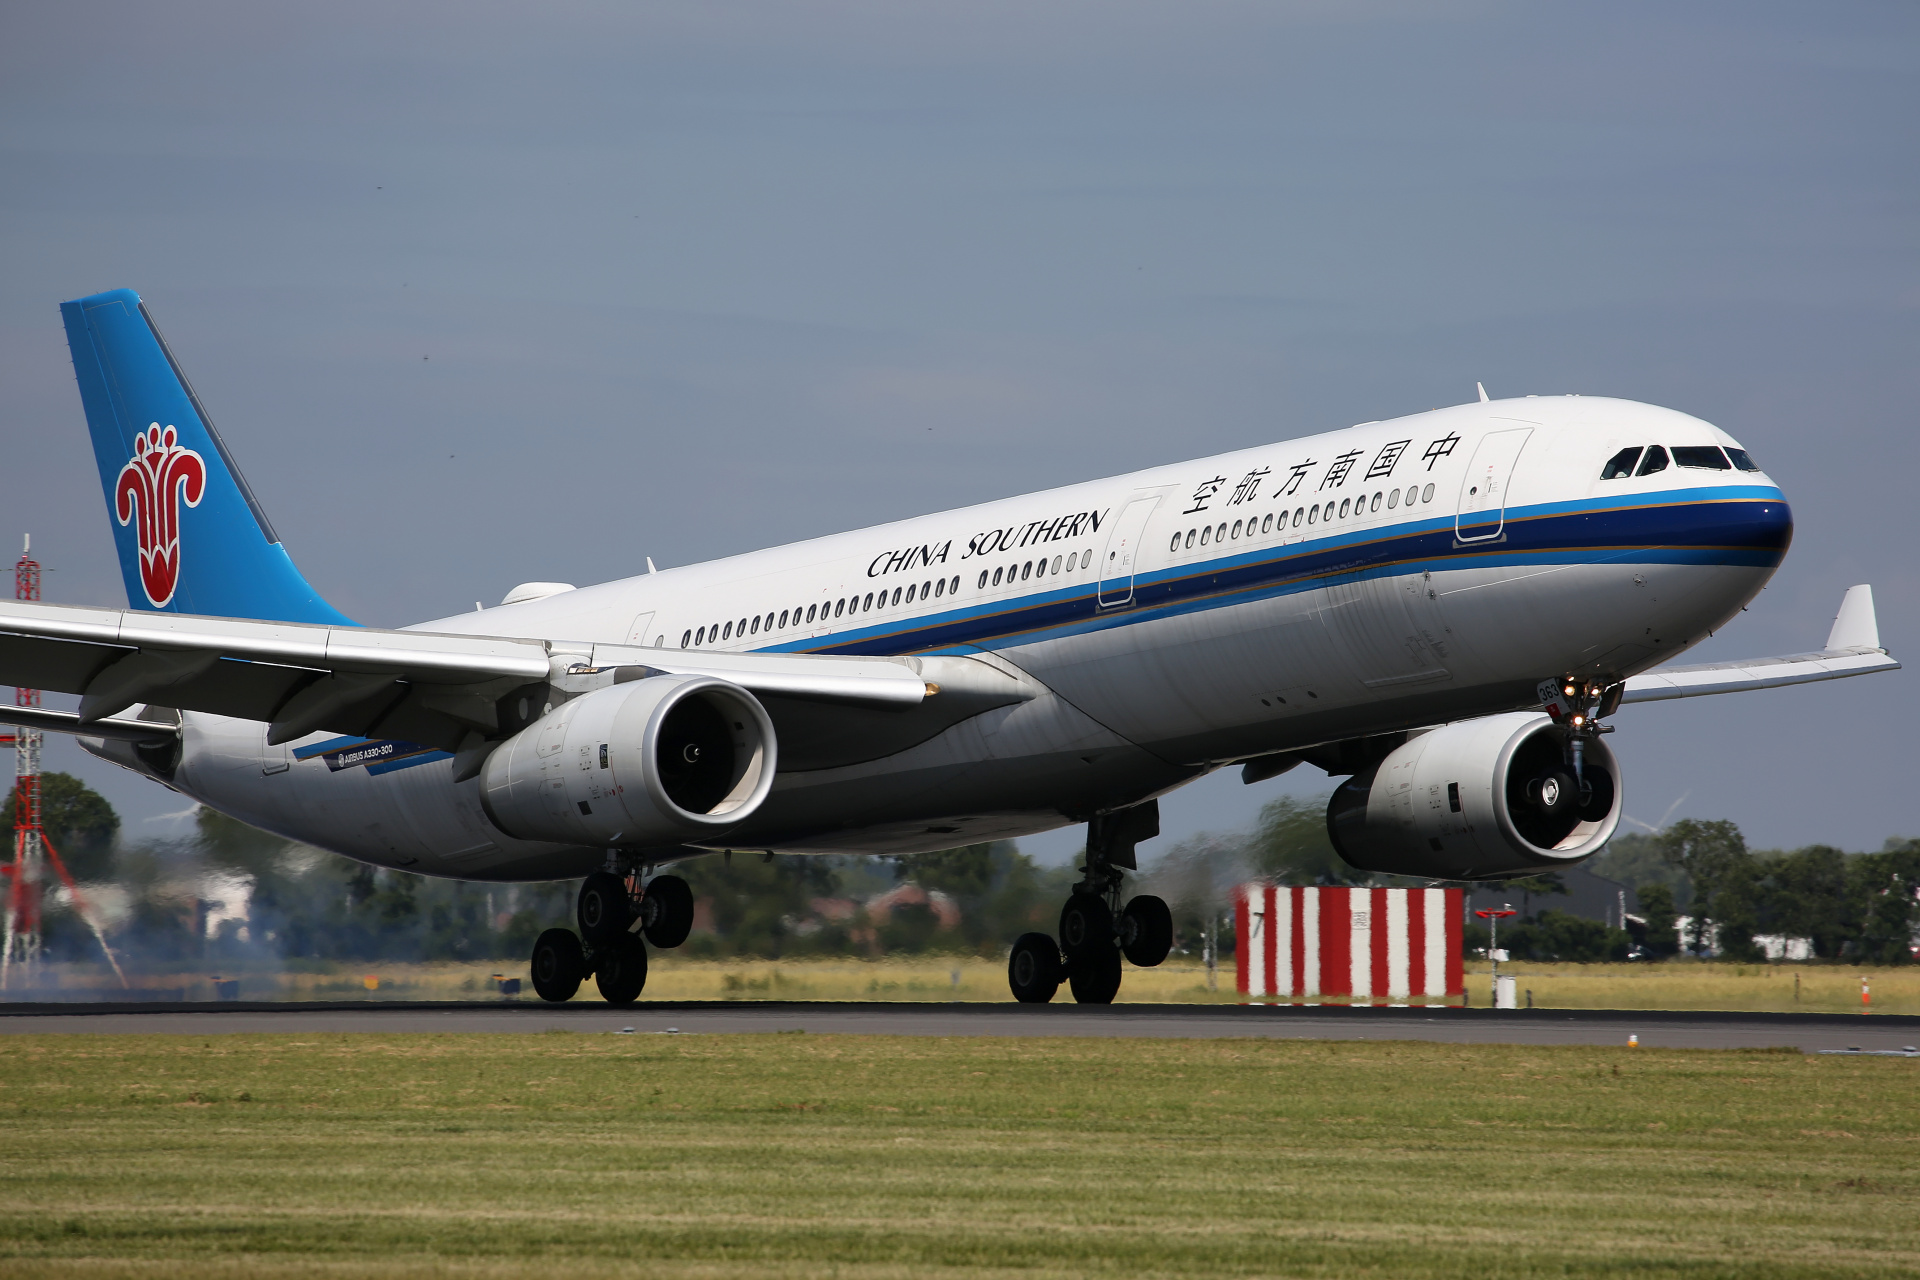 B-8363, China Southern Airlines (Samoloty » Spotting na Schiphol » Airbus A330-300)